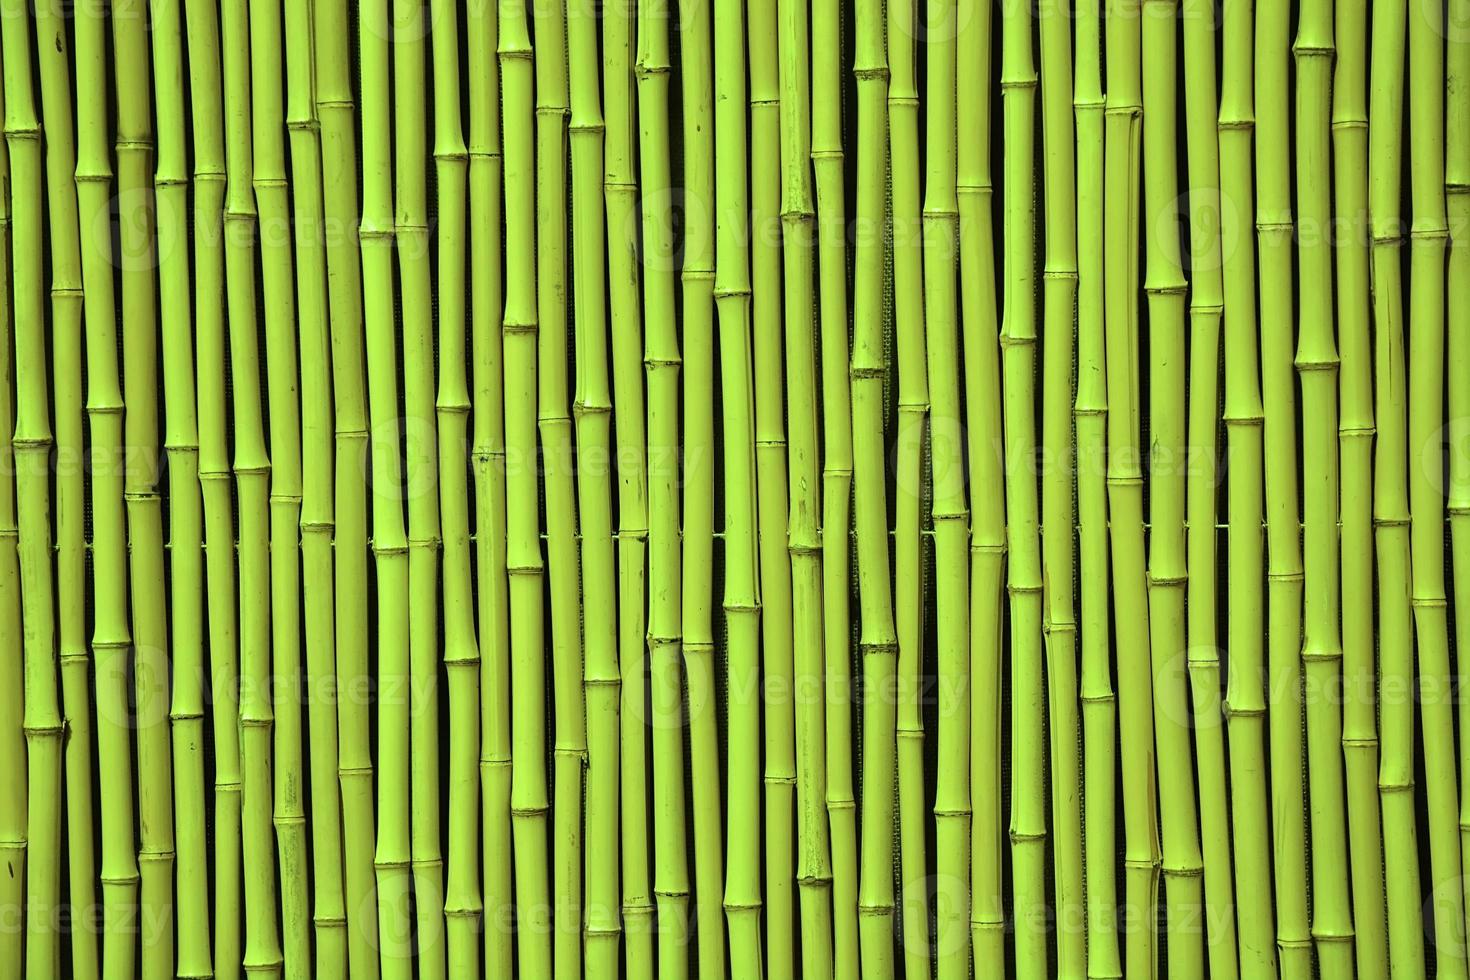 Green bamboo. Picture can be used as a background photo